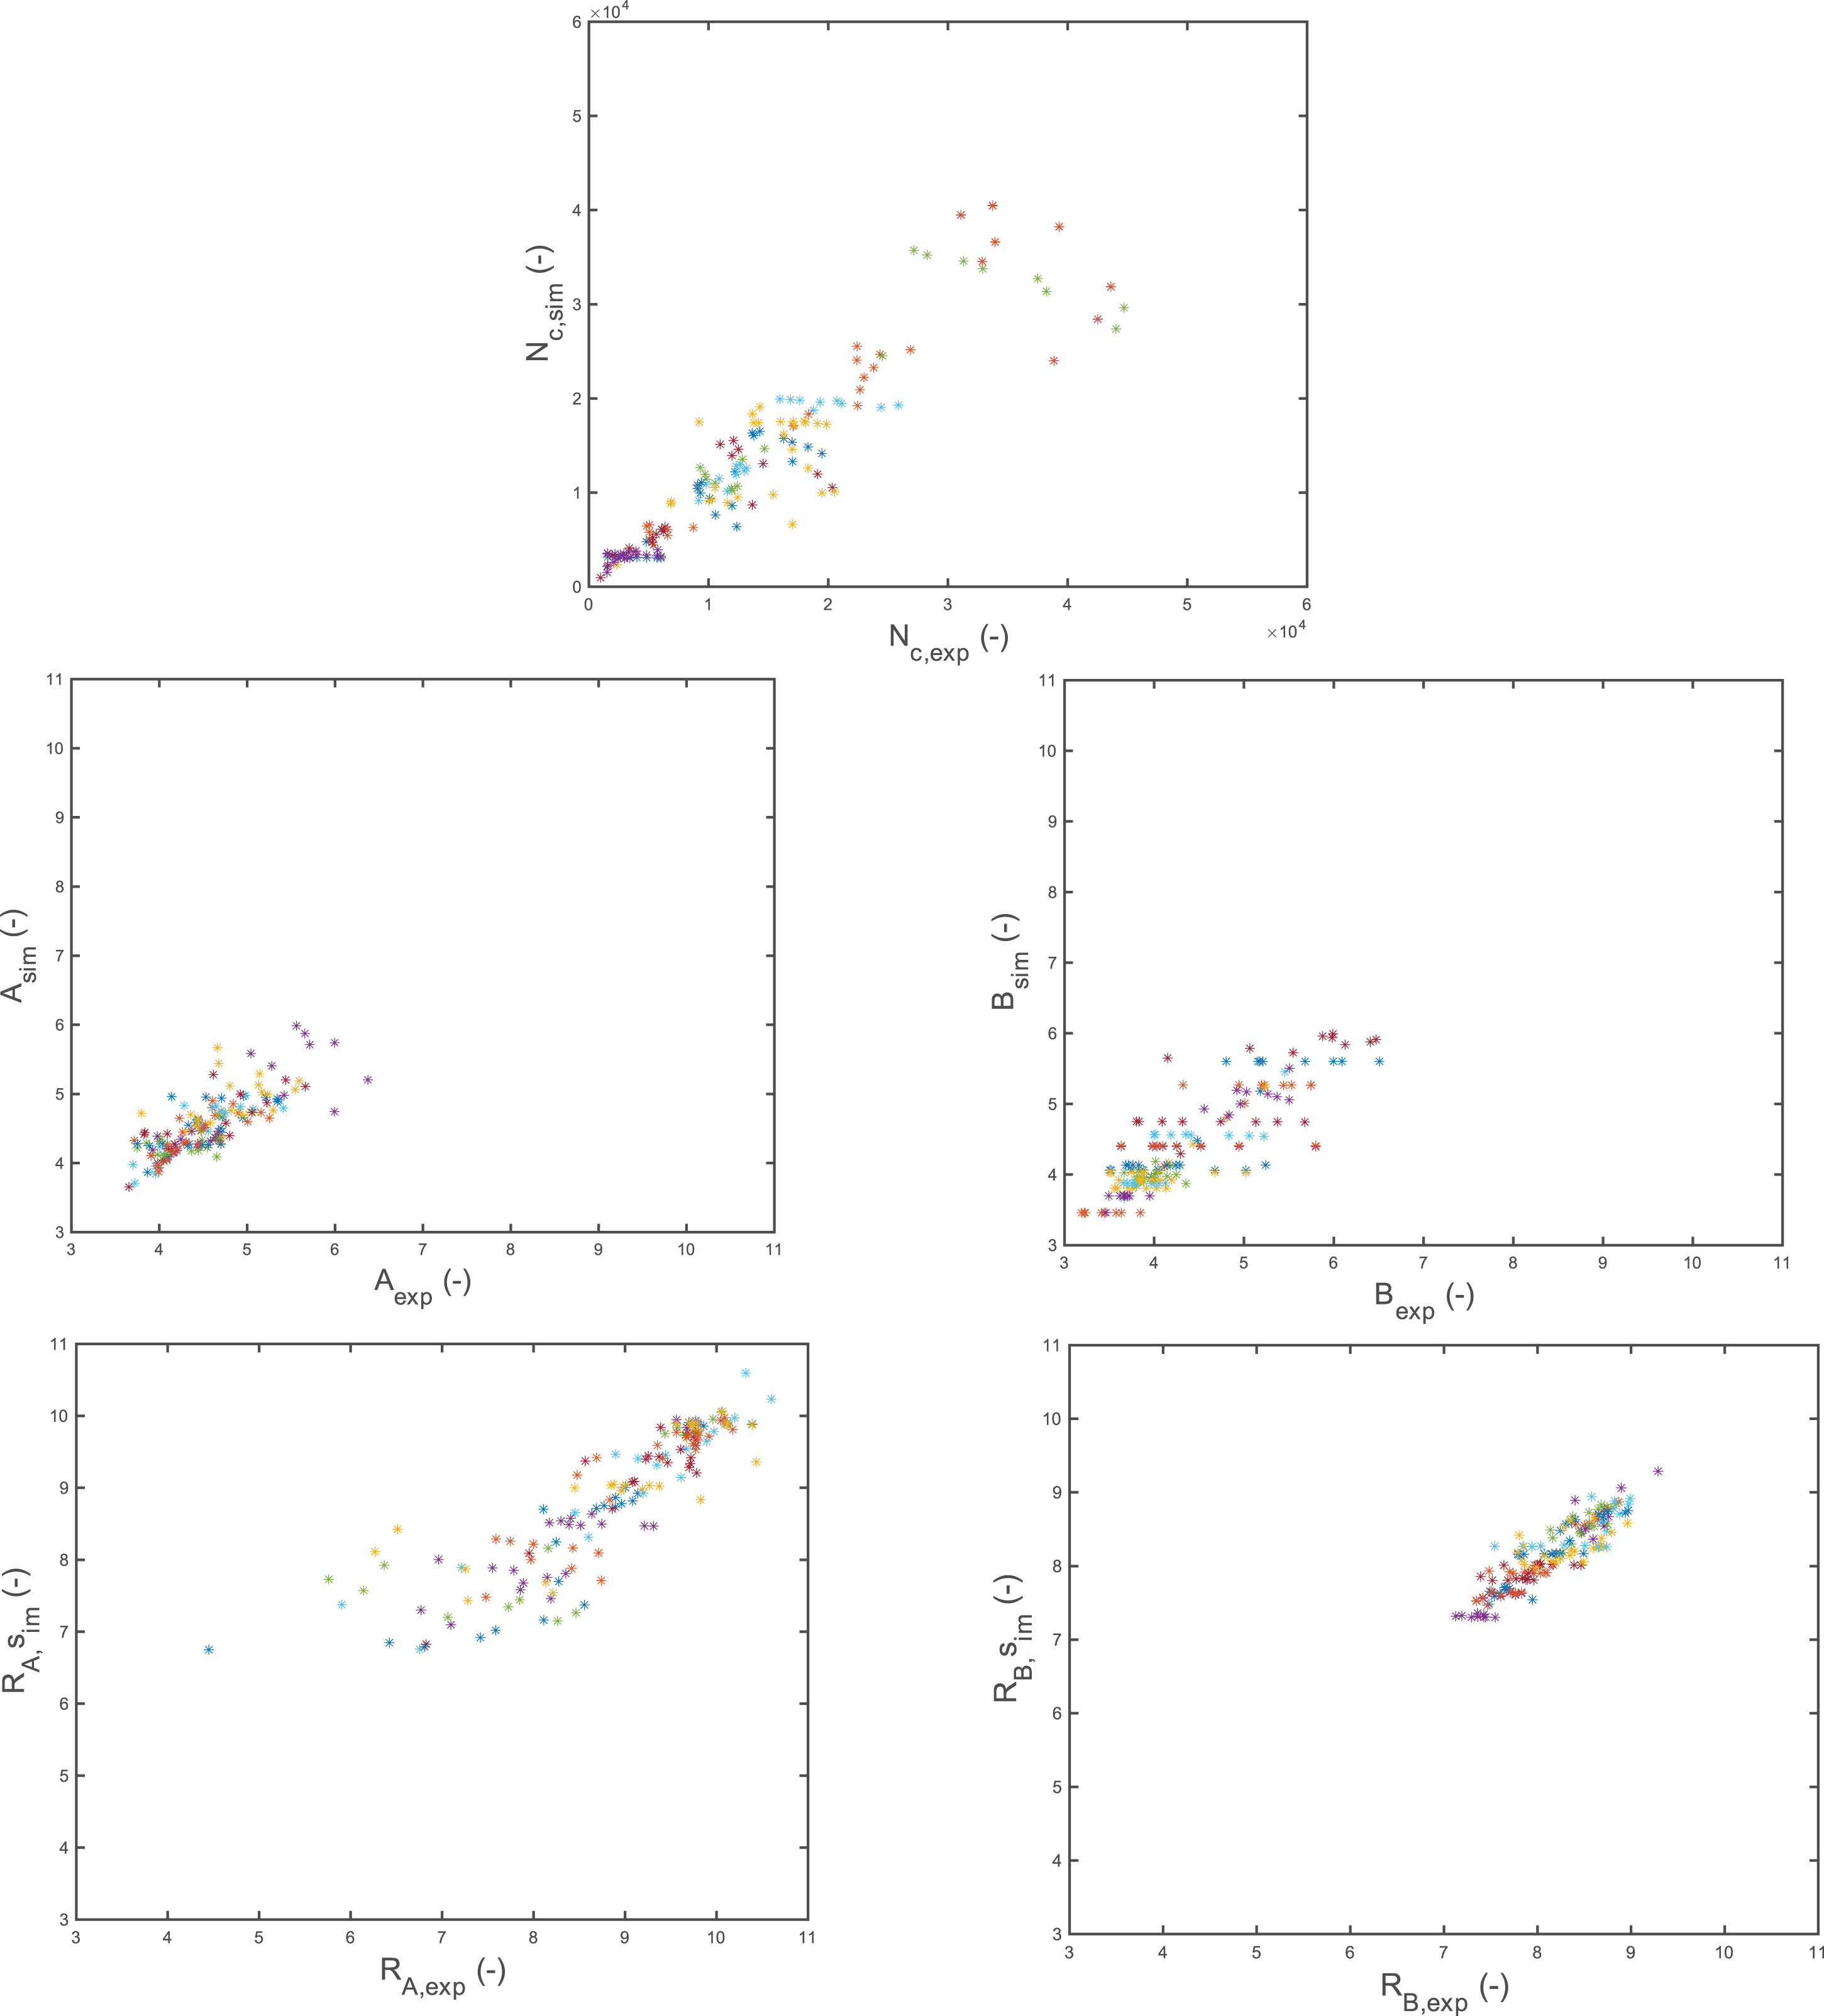 Parity plots for calculated Nc, A, B, RA, RB fluorescence against measured data (each color corresponds to one patient). Pearsons correlation coefficient values are 0.906 for Nc, 0.715 for A, 0.818 for B, 0.855 for RA and 0.874 for RB.